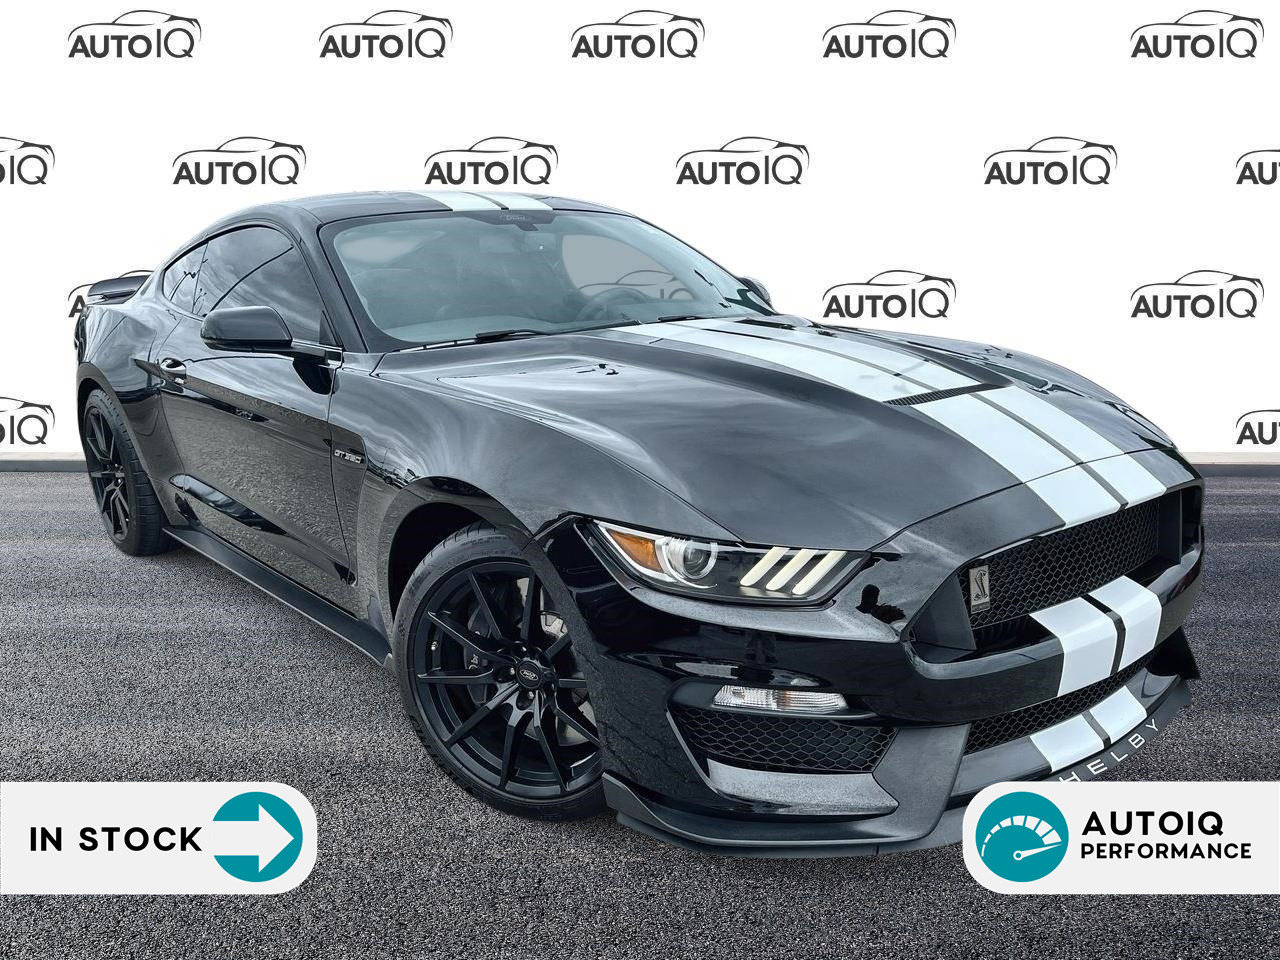 2016 Ford Mustang Shelby MUSTANG | 5.2L V8 | SYNC